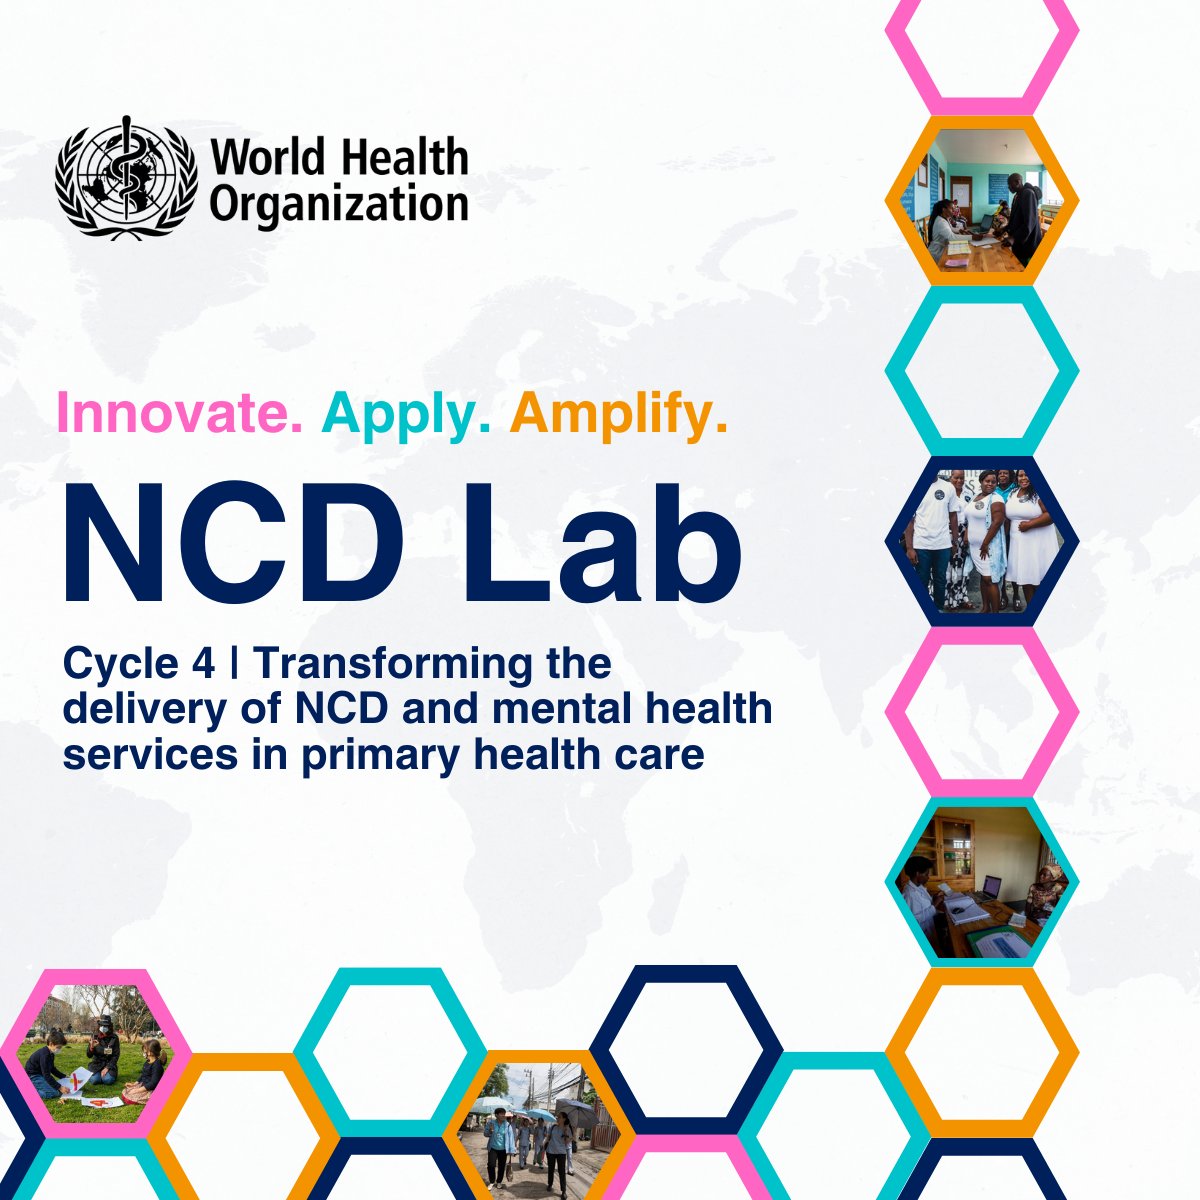 To prevent and manage NCDs and mental health conditions among women and girls, primary health care is a critical entry point. The @WHO NCD Lab seeks innovative primary care approaches tailored to women’s and girls’ needs. ➡️Submit your project: buff.ly/43XD1v1